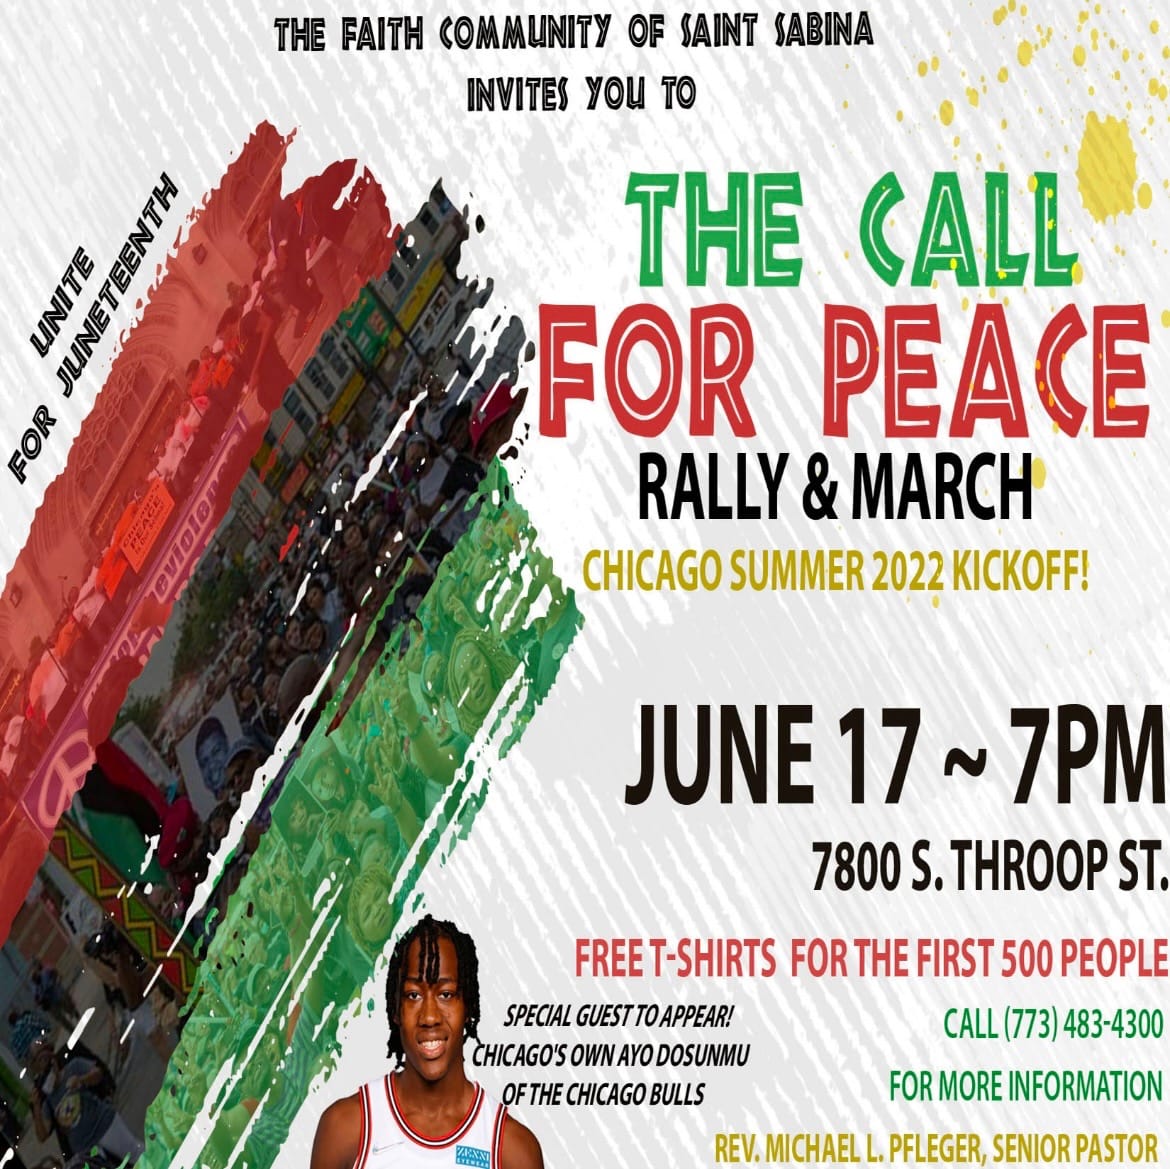 The Call For Peace Rally & March